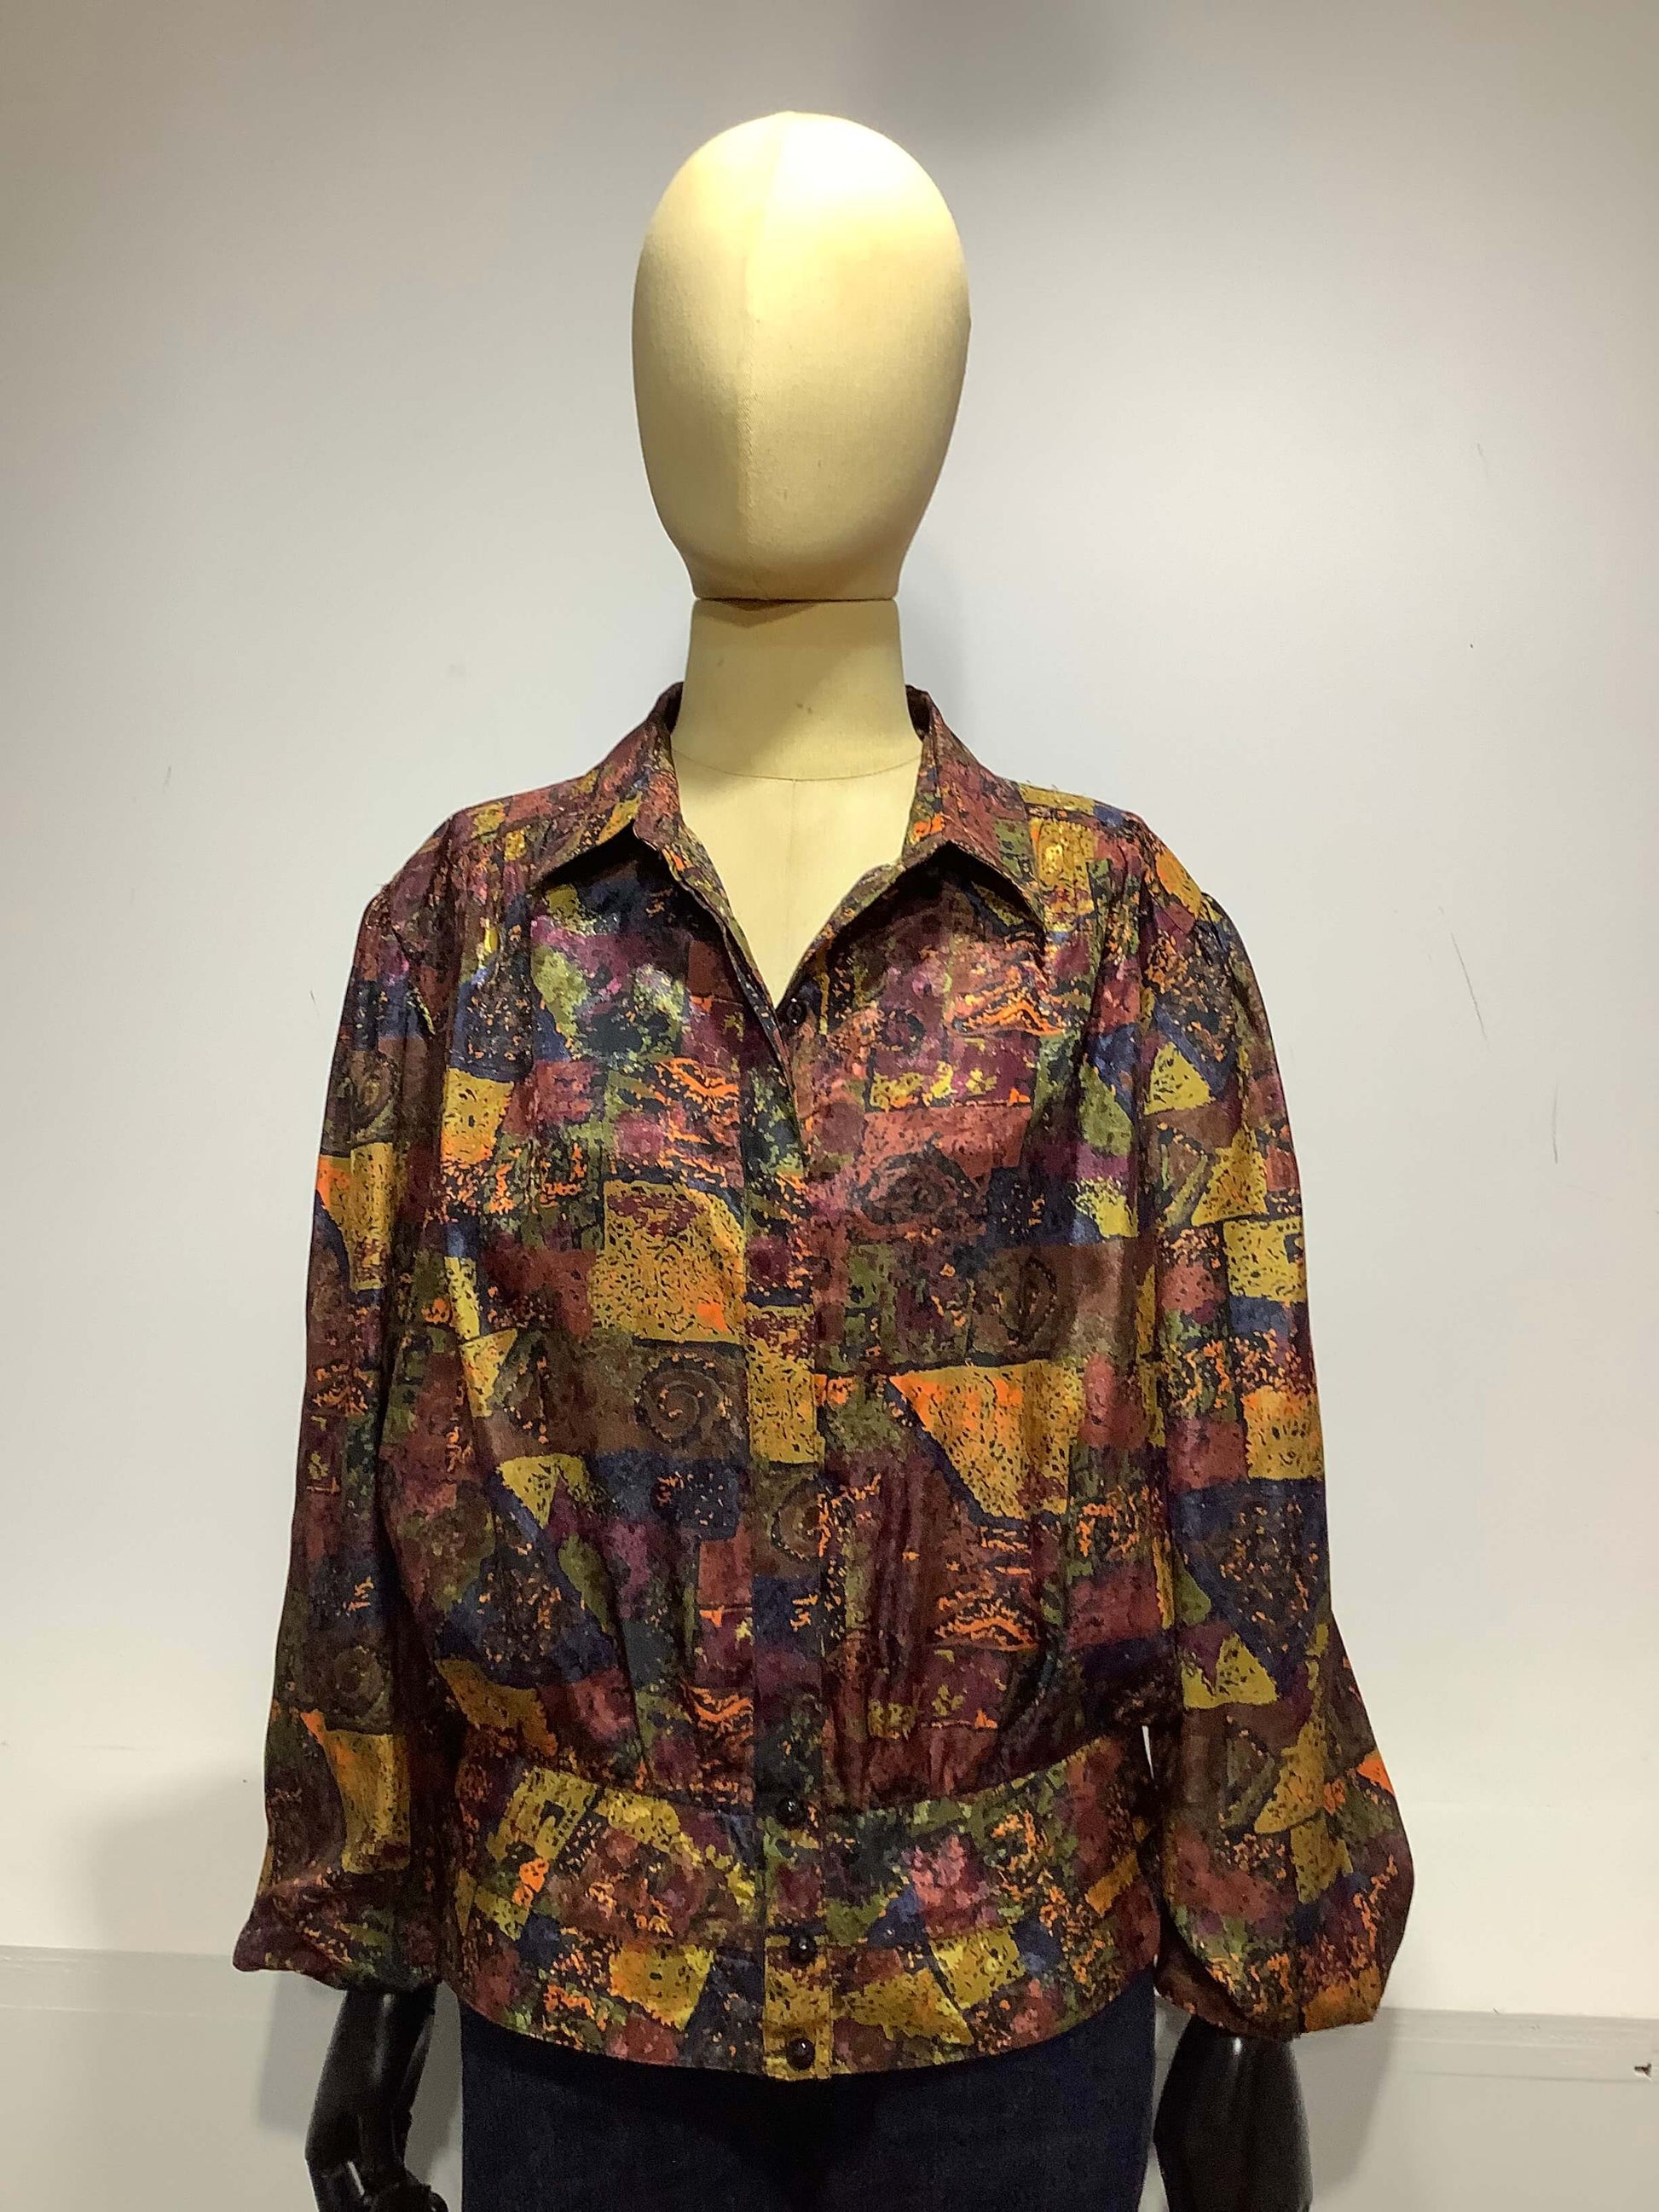 Vintage 80s blouse-Bitter and Better-80s,bloes,bloes met print,blouse,brown blouse,bruine blouse,fashion,Print,printed blouse,sustainable,vintage,vintage blouse